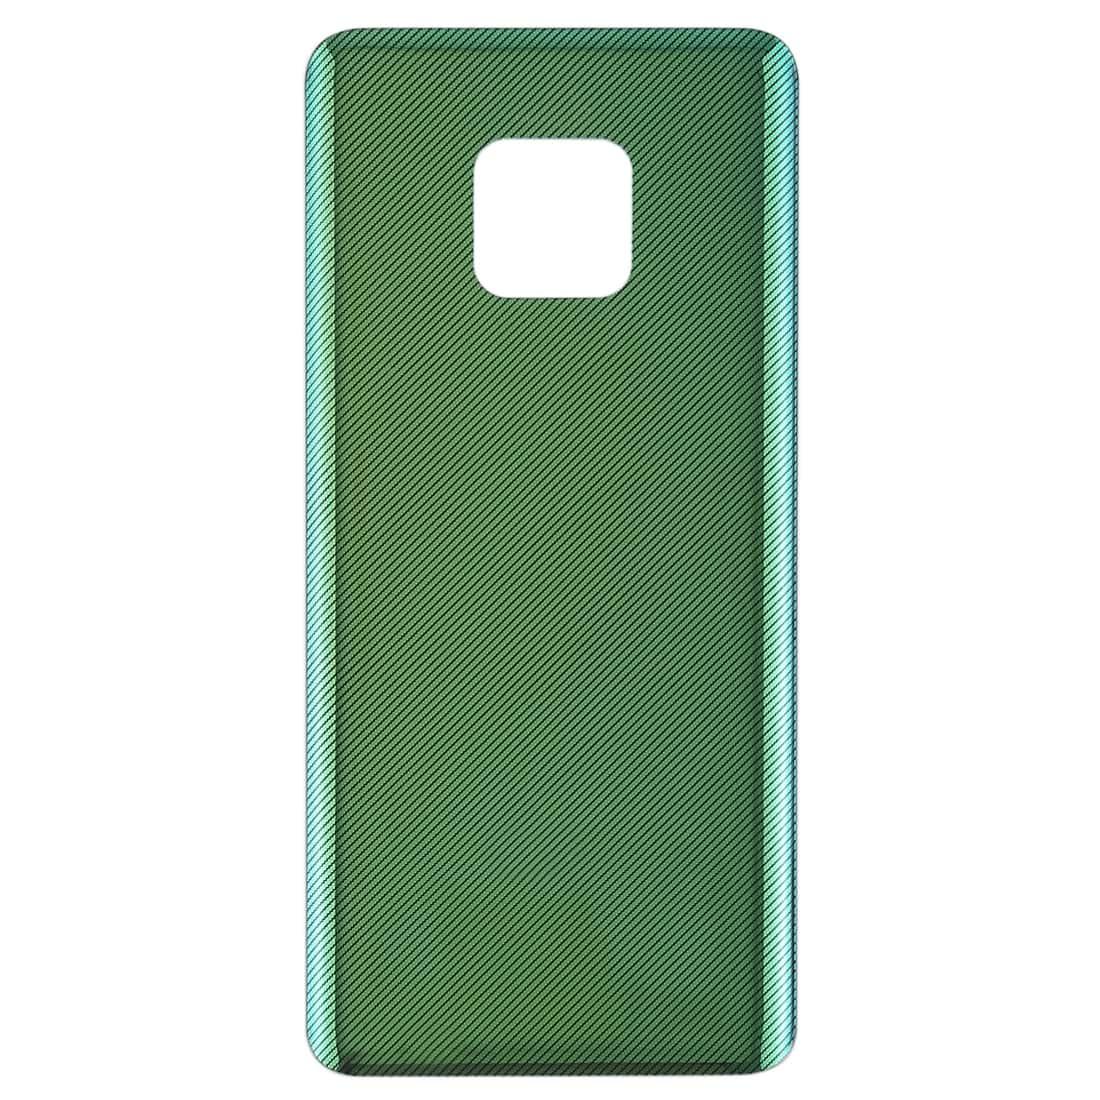 Back Glass Panel for  Huawei Mate 20 Pro Green